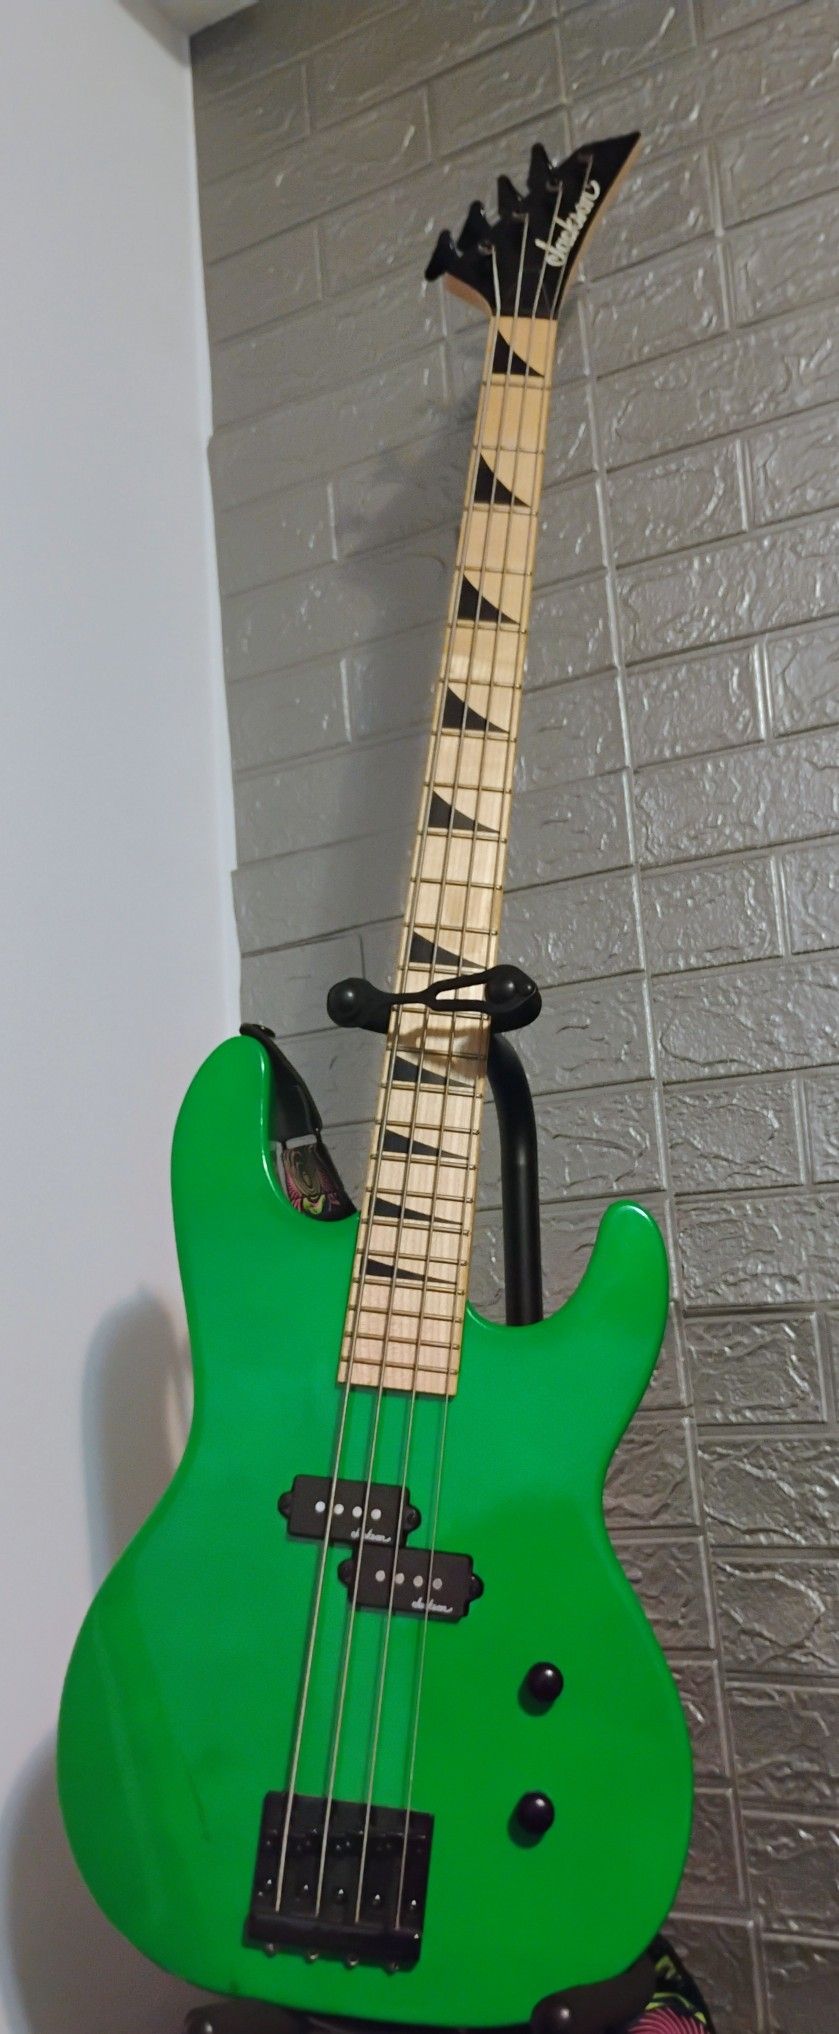 Bass Guitar With Strap, Amp, Cord And Stand